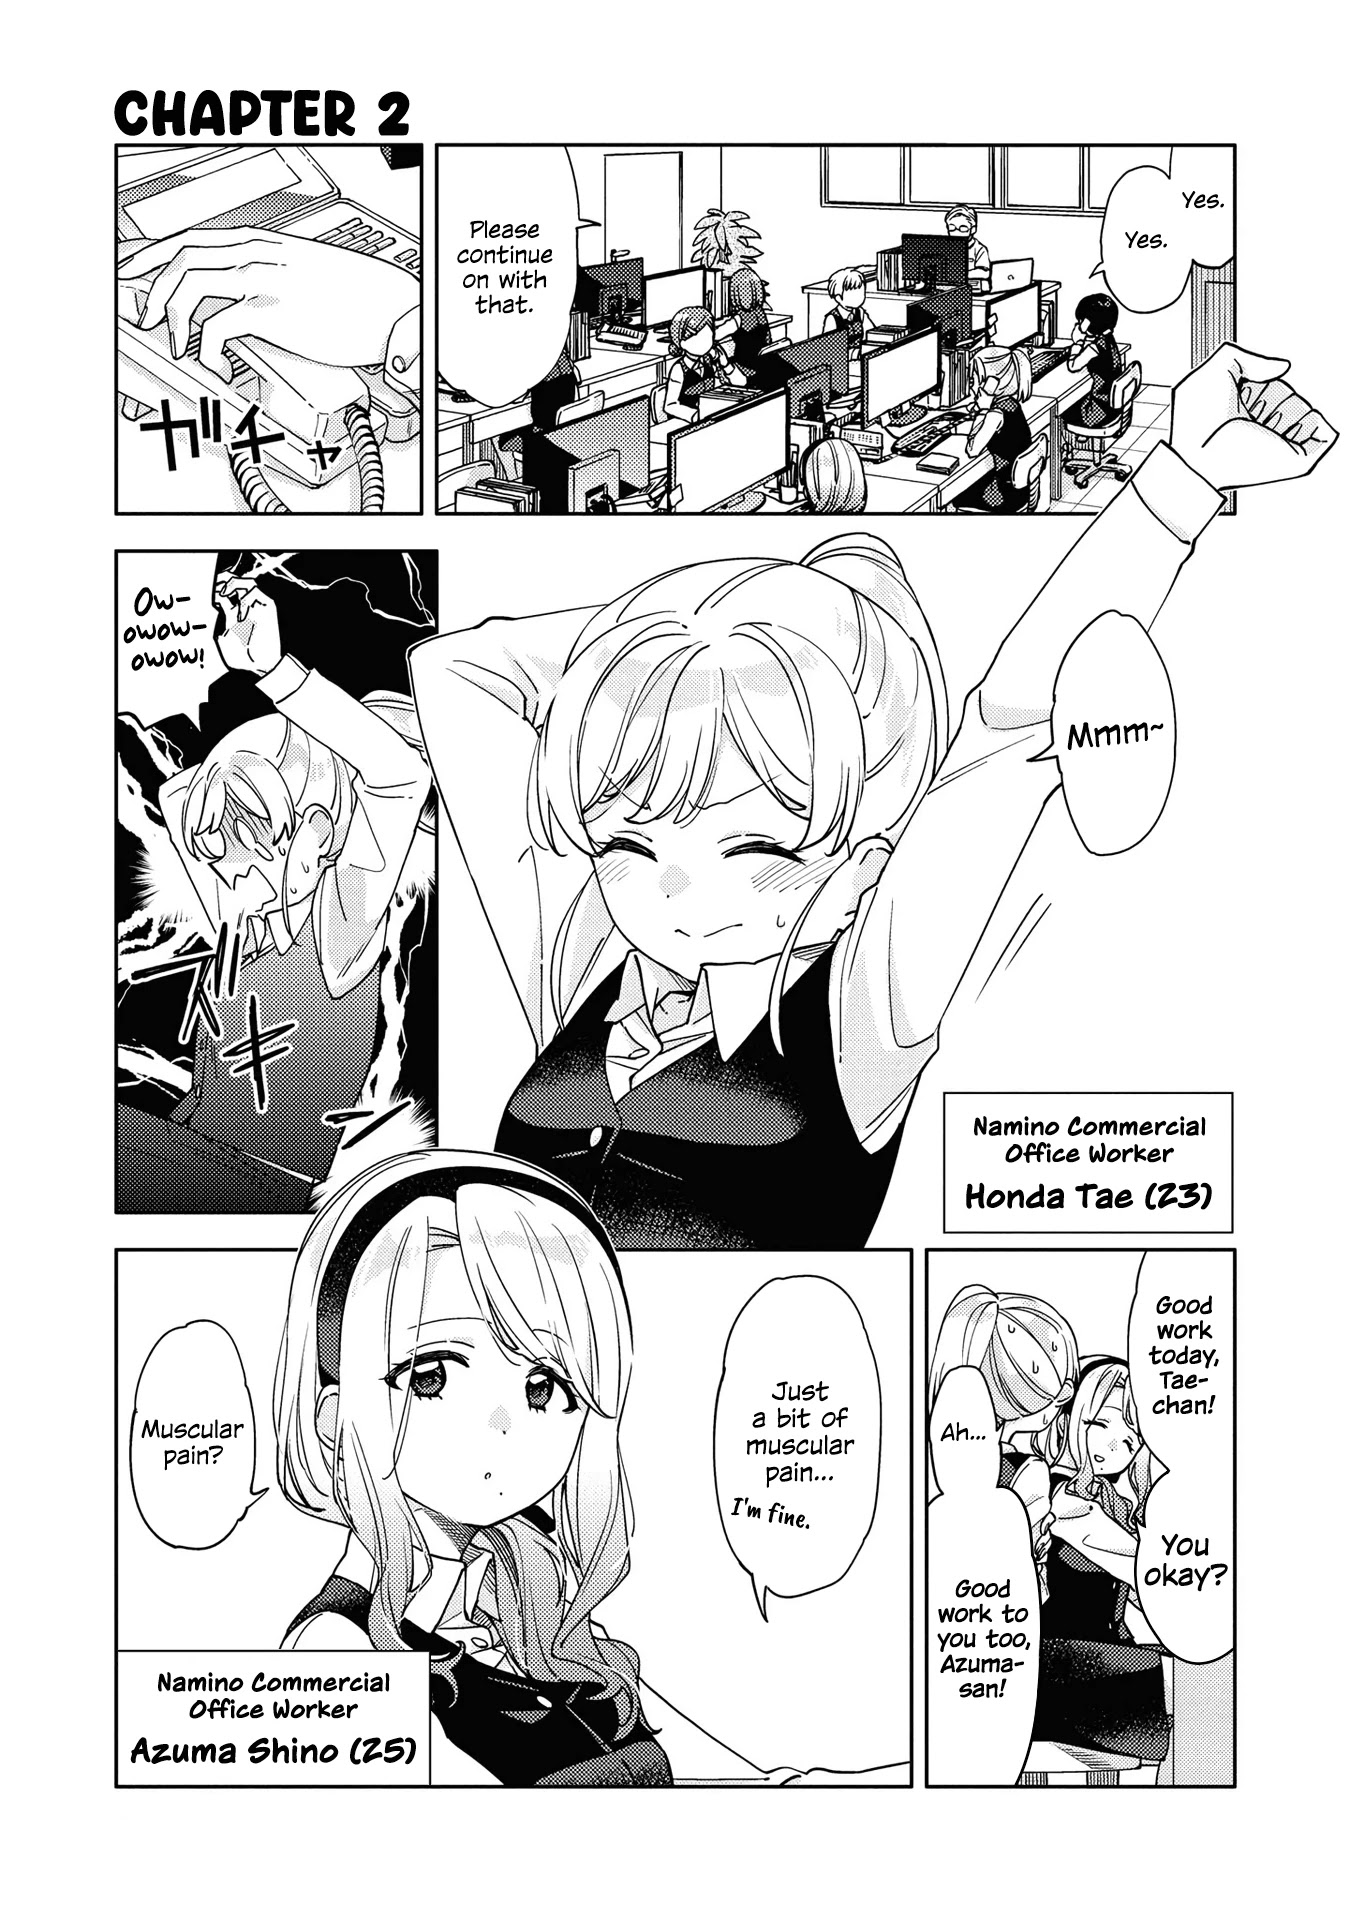 Be Careful, Onee-San. Chapter 2